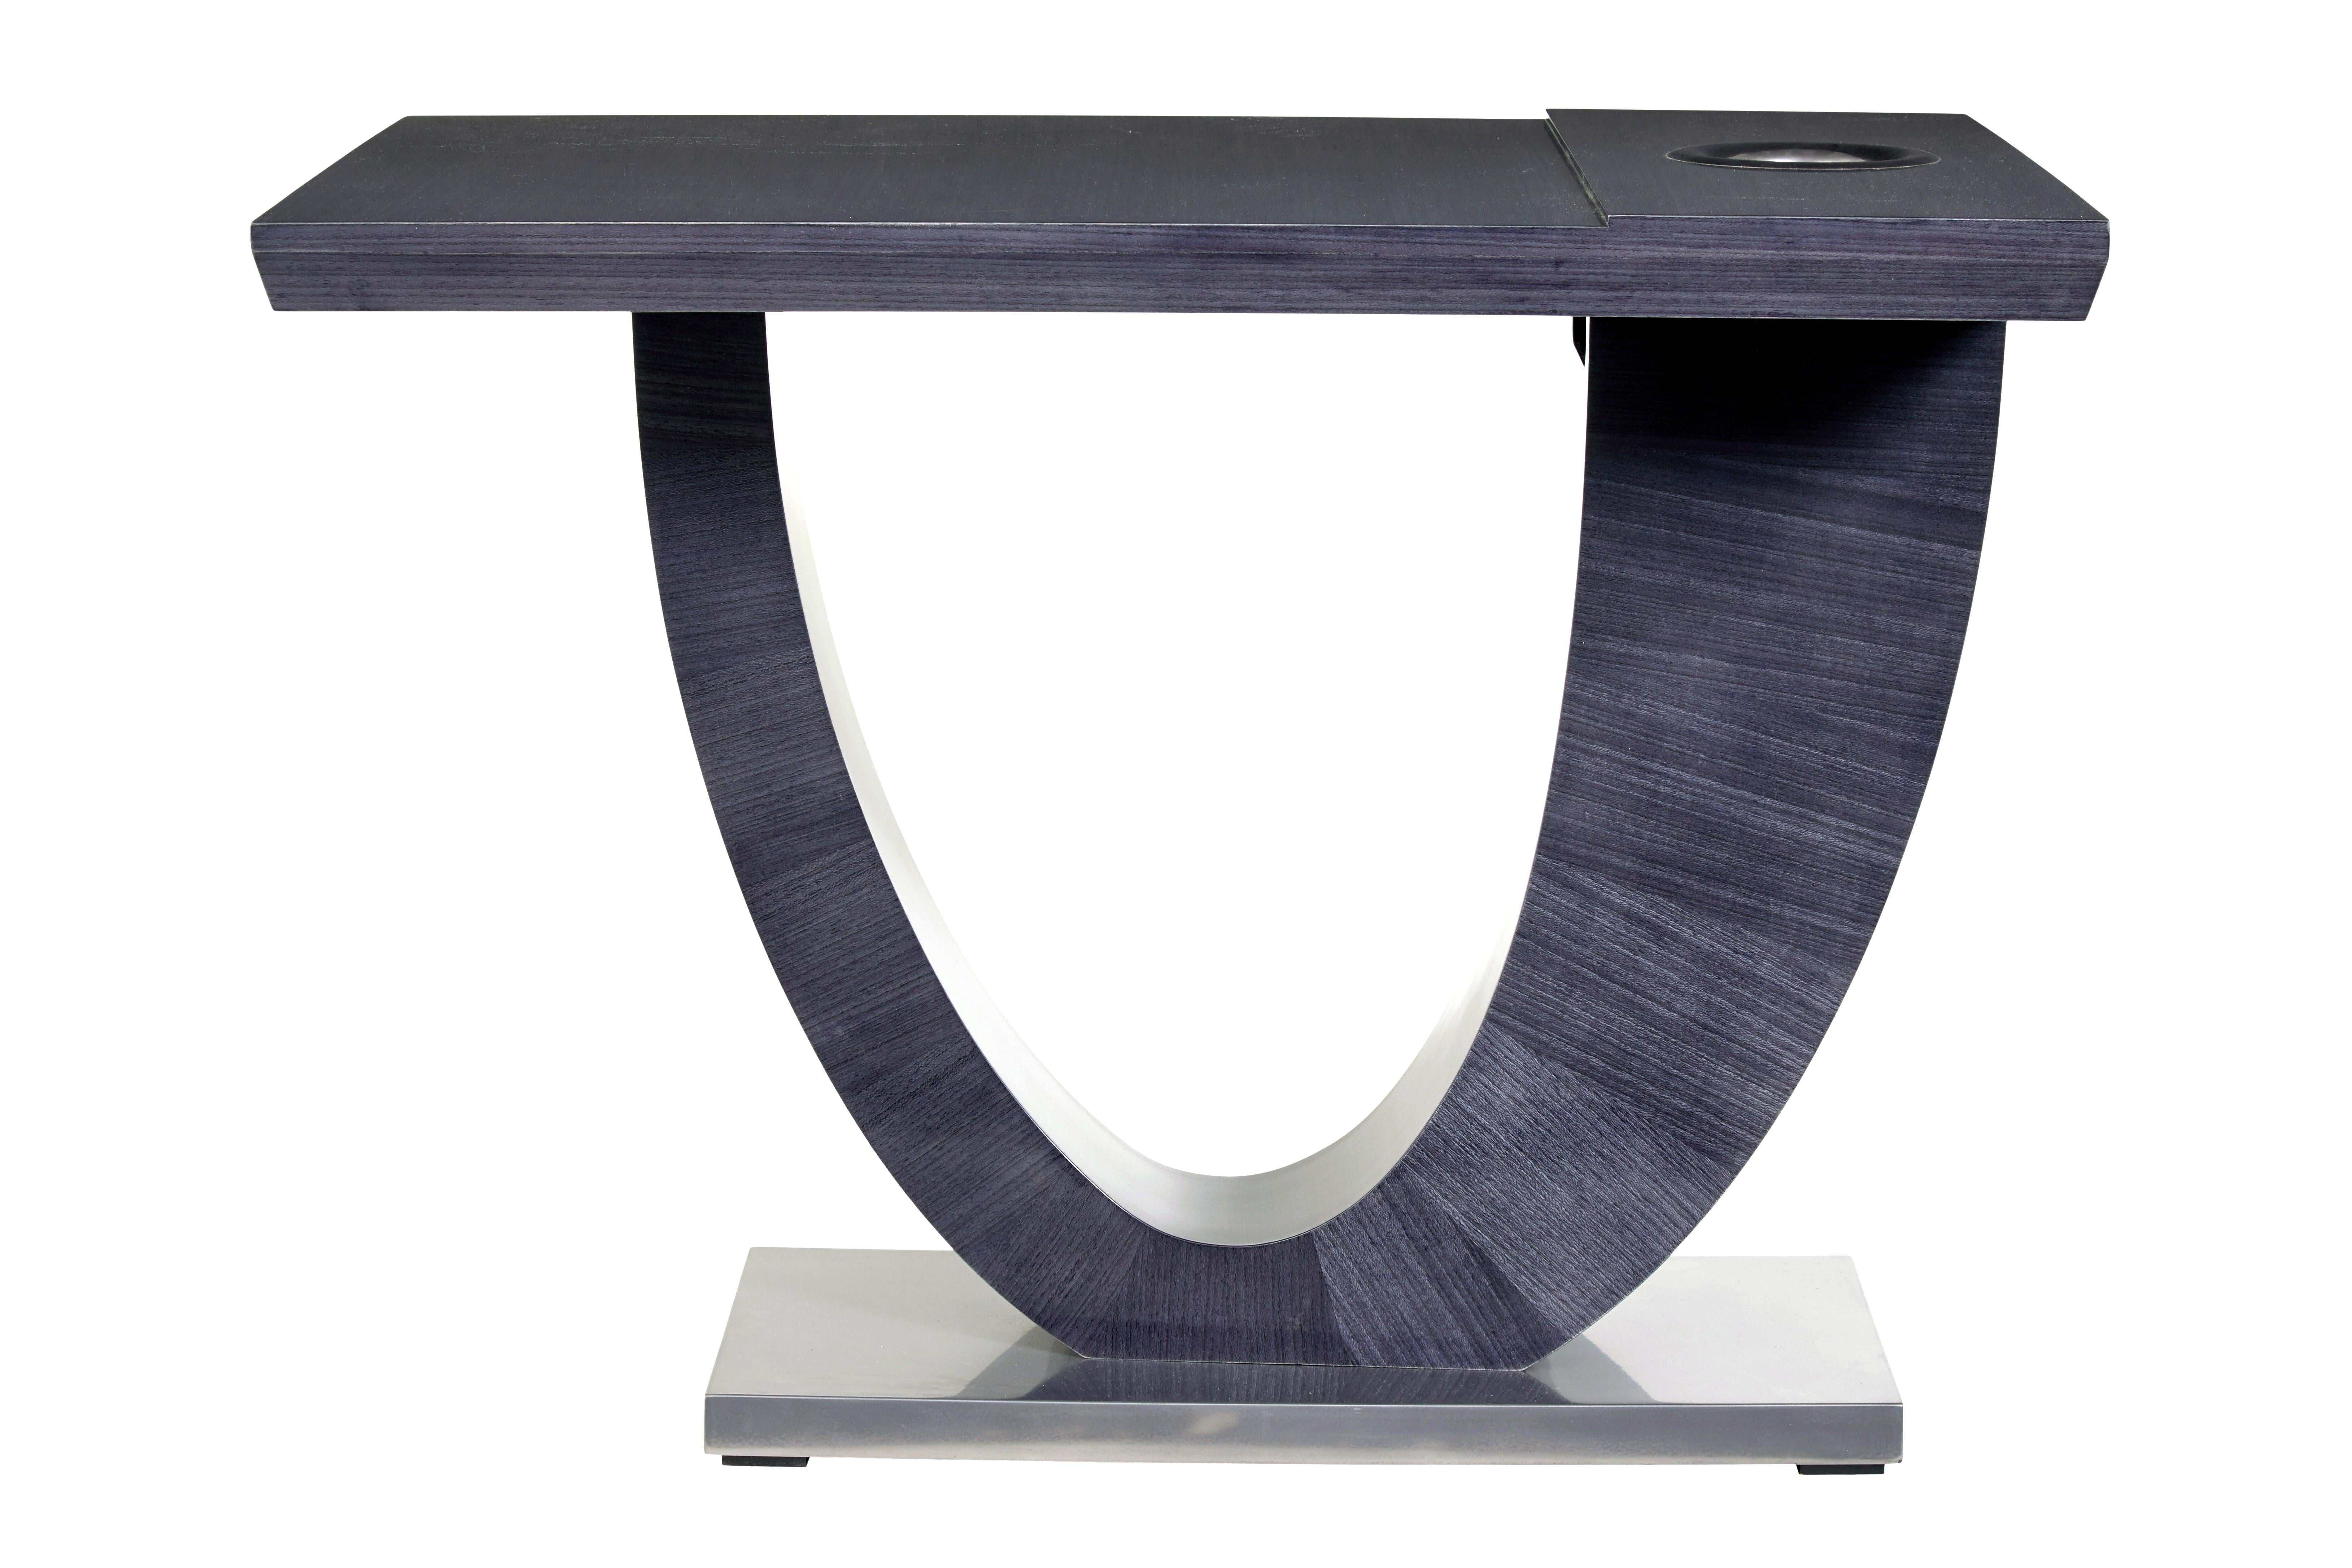 Bespoke modern grey sycamore Kaelo wine table circa 2010.

This table is unique, being the only one ever made to showcase the Kaelo wine chilling device.

Modern table using modern techniques, but taking inspiration from the art deco period. 